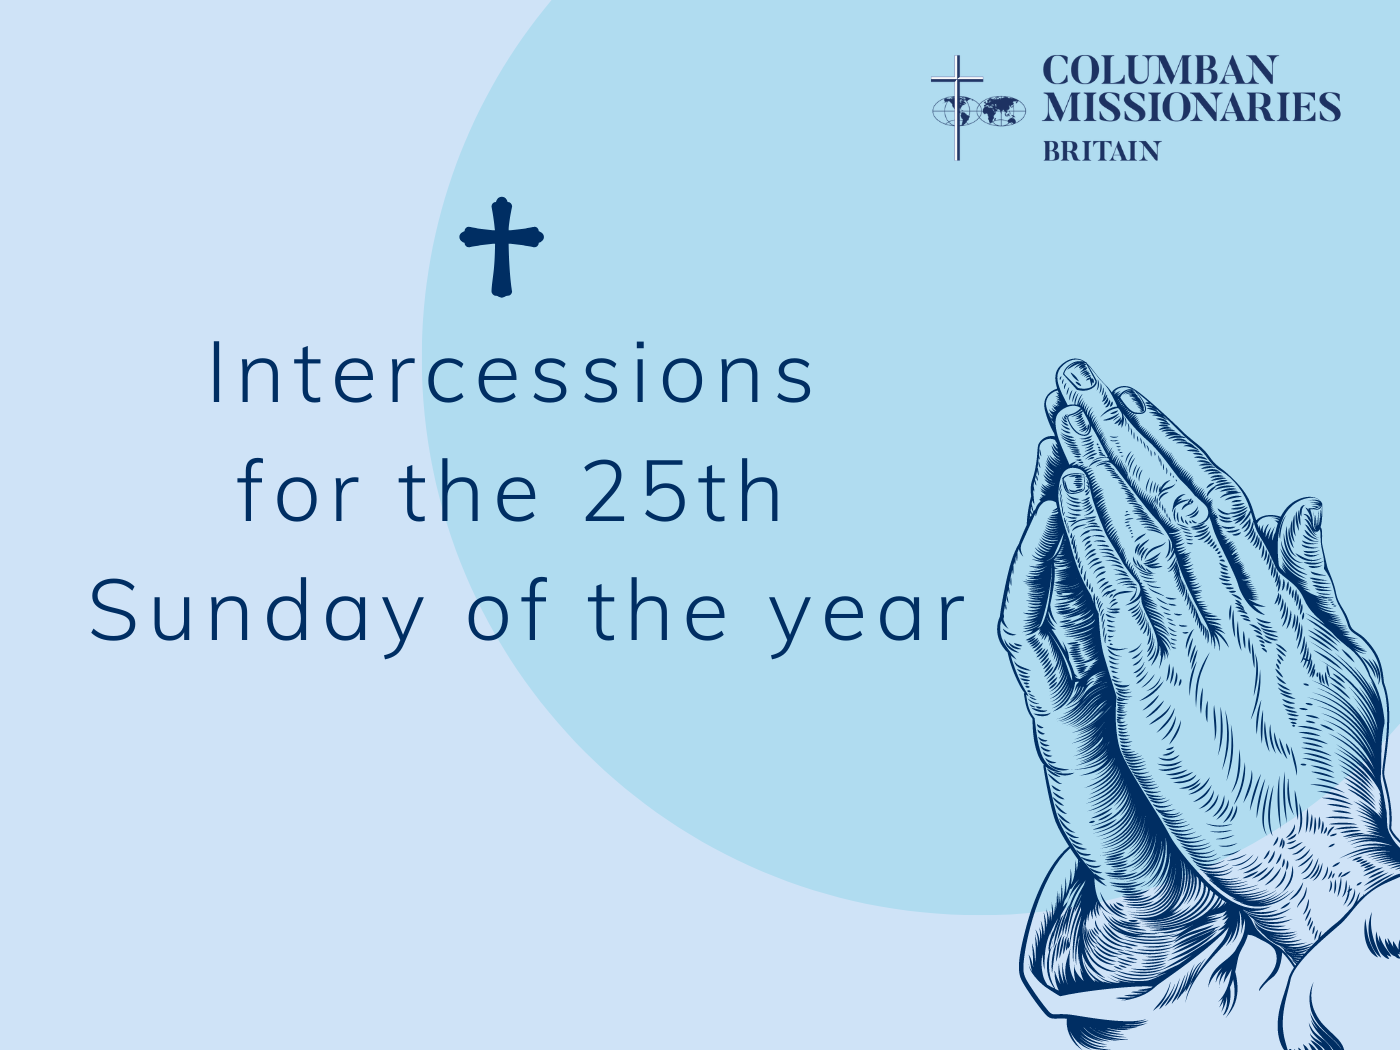 Download prayers of intercession for the 25th Sunday of the year